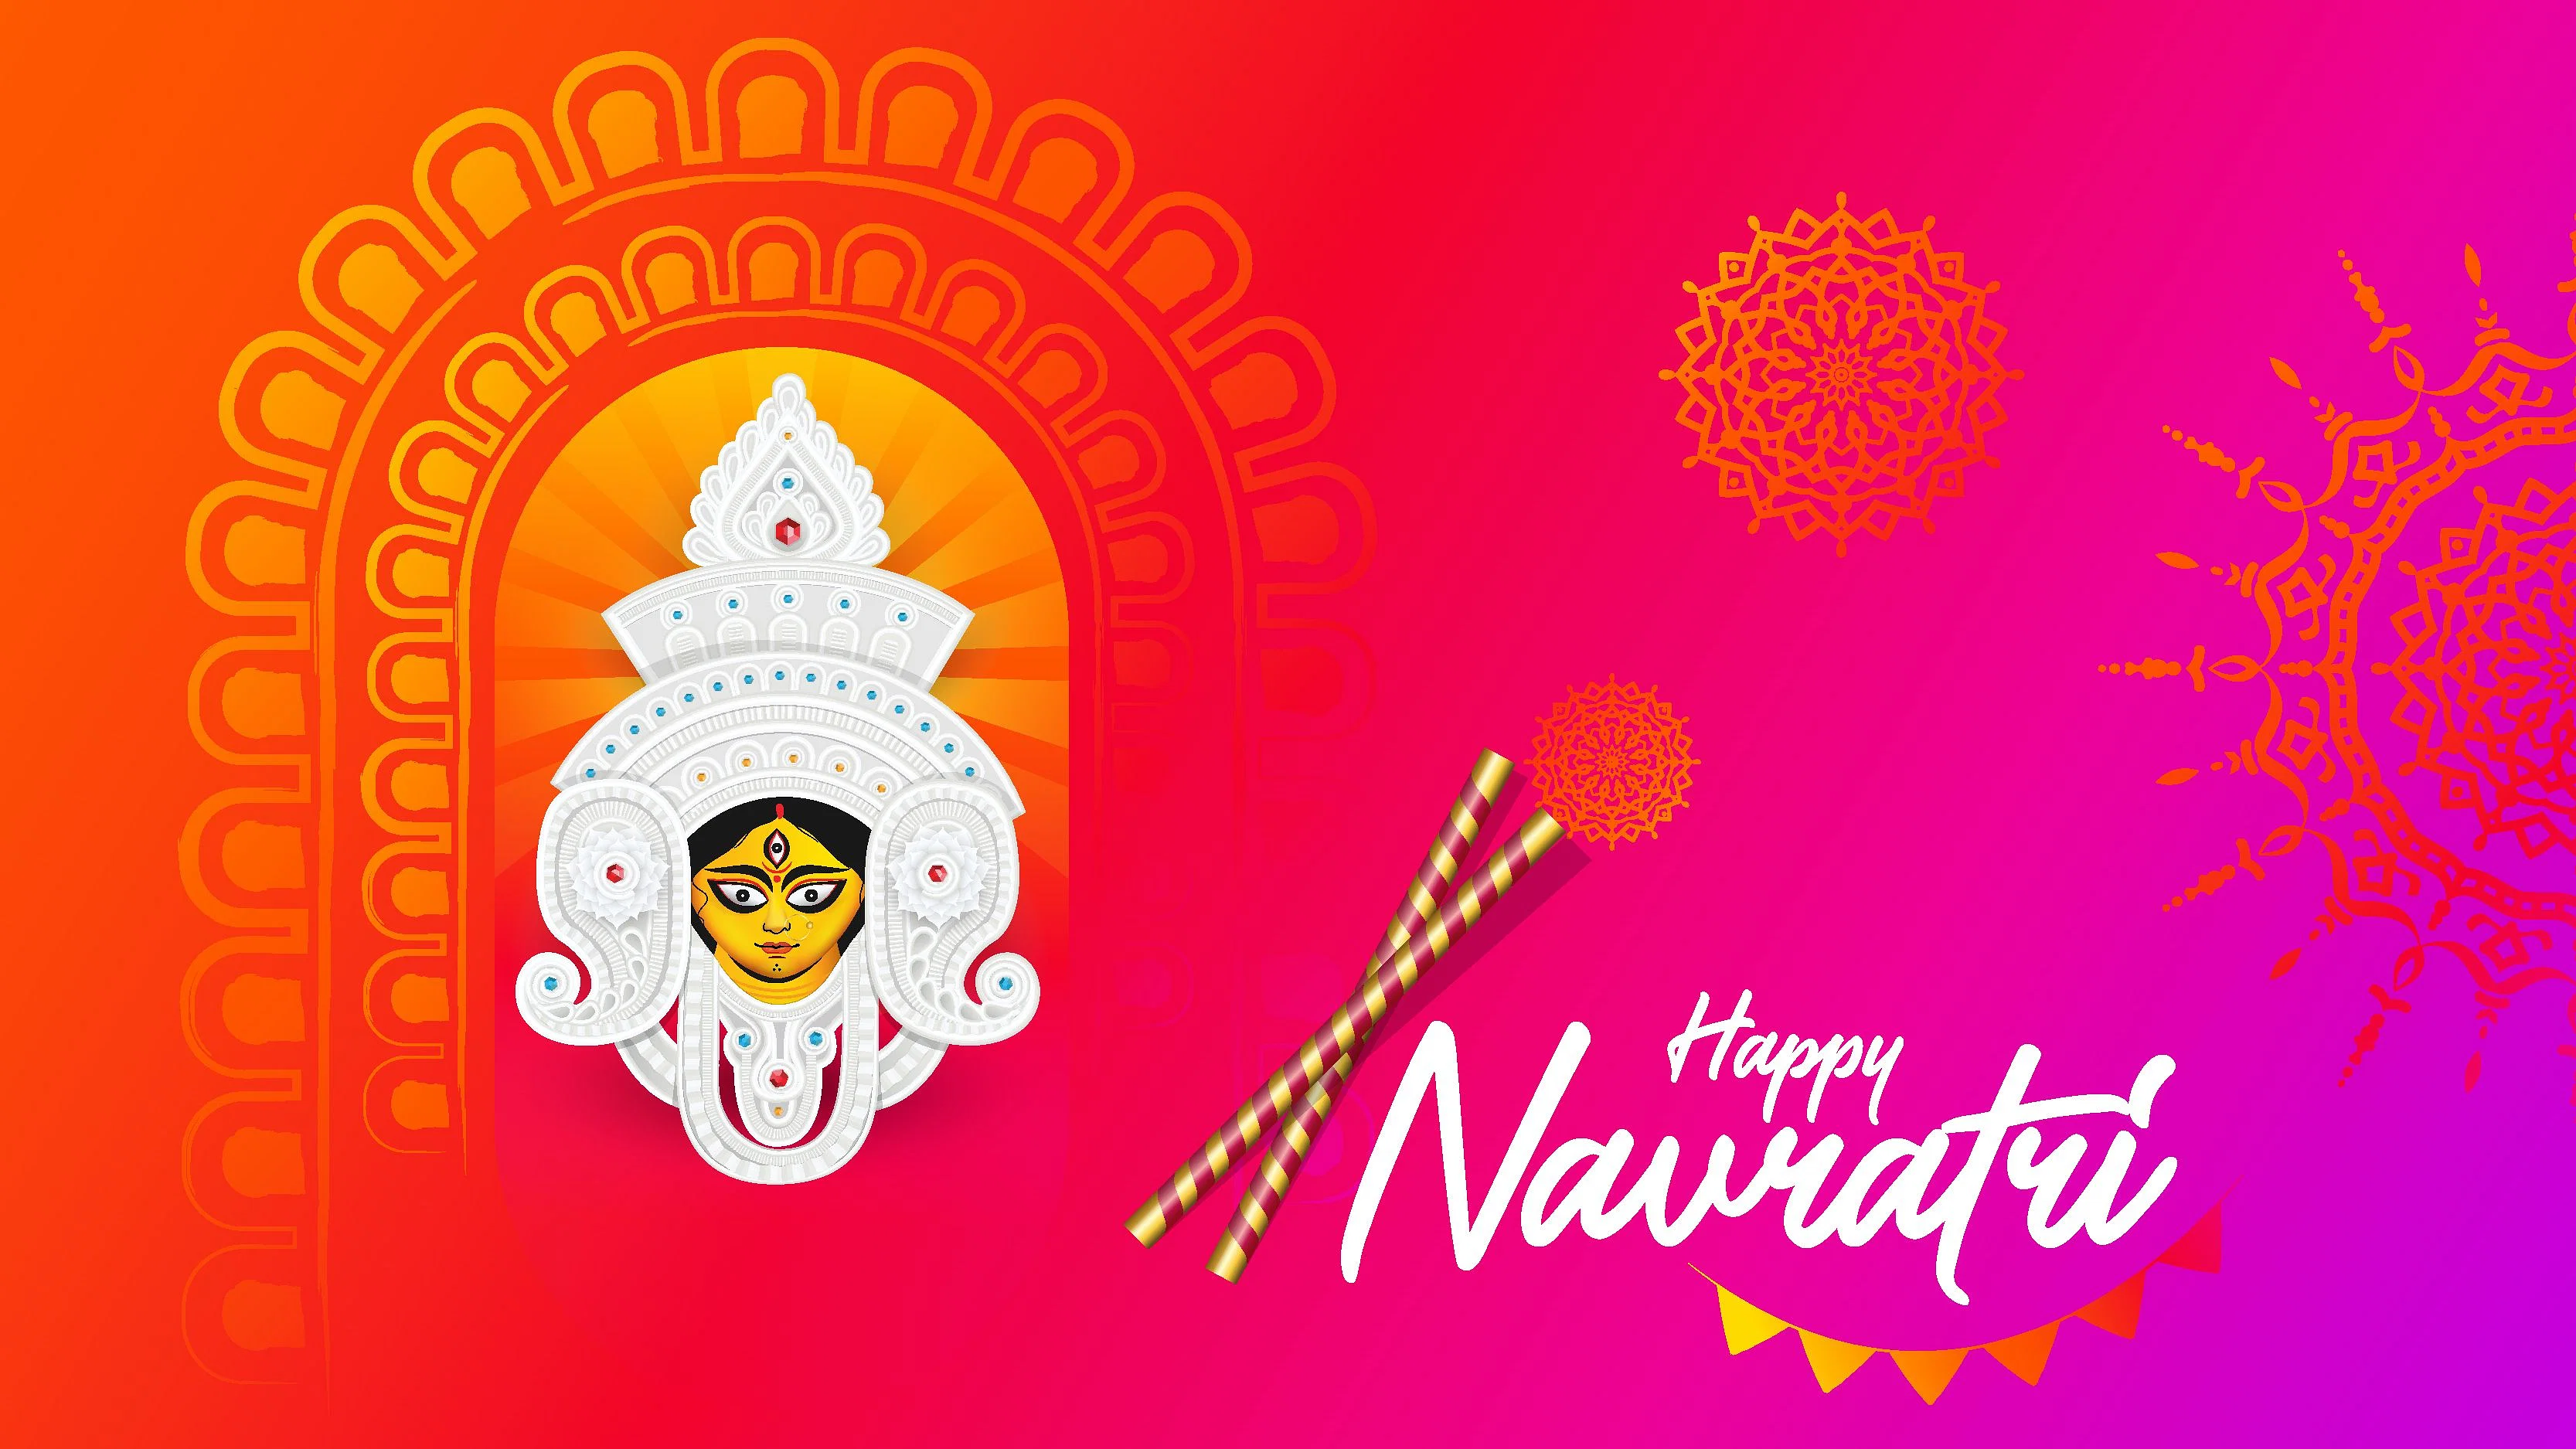 #{"id":1741,"_id":"624b035e3e6d397ee345976a","name":"happy-navratri","count":15,"data":"{\"_id\":{\"$oid\":\"624b035e3e6d397ee345976a\"},\"name\":\"happy-navratri\",\"count\":15,\"updatedAt\":{\"$date\":\"2022-04-04T15:00:12.807Z\"}}","deleted_at":null,"created_at":"2022-08-12T09:03:30.000000Z","updated_at":"2022-08-12T09:03:30.000000Z","merge_with":null,"pivot":{"taggable_id":1340,"tag_id":1741,"taggable_type":"App\\Models\\Status"}}, #{"id":42,"_id":"61f3f785e0f744570541c05a","name":"navratri","count":67,"data":"{\"_id\":{\"$oid\":\"61f3f785e0f744570541c05a\"},\"id\":\"17\",\"name\":\"navratri\",\"created_at\":\"2020-10-15-13:17:23\",\"updated_at\":\"2020-10-15-13:17:23\",\"updatedAt\":{\"$date\":\"2022-04-04T15:00:12.807Z\"},\"count\":67}","deleted_at":null,"created_at":"2020-10-15T01:17:23.000000Z","updated_at":"2020-10-15T01:17:23.000000Z","merge_with":null,"pivot":{"taggable_id":1340,"tag_id":42,"taggable_type":"App\\Models\\Status"}}, #{"id":1740,"_id":"624b035e3e6d397ee3459769","name":"navratri-special","count":15,"data":"{\"_id\":{\"$oid\":\"624b035e3e6d397ee3459769\"},\"name\":\"navratri-special\",\"count\":15,\"updatedAt\":{\"$date\":\"2022-04-04T15:00:12.807Z\"}}","deleted_at":null,"created_at":"2022-08-12T09:03:30.000000Z","updated_at":"2022-08-12T09:03:30.000000Z","merge_with":null,"pivot":{"taggable_id":1340,"tag_id":1740,"taggable_type":"App\\Models\\Status"}}, #{"id":1739,"_id":"624b035e3e6d397ee3459768","name":"best-navratri","count":15,"data":"{\"_id\":{\"$oid\":\"624b035e3e6d397ee3459768\"},\"name\":\"best-navratri\",\"count\":15,\"updatedAt\":{\"$date\":\"2022-04-04T15:00:12.807Z\"}}","deleted_at":null,"created_at":"2022-08-12T09:03:30.000000Z","updated_at":"2022-08-12T09:03:30.000000Z","merge_with":null,"pivot":{"taggable_id":1340,"tag_id":1739,"taggable_type":"App\\Models\\Status"}}, #{"id":1738,"_id":"624b035e3e6d397ee3459767","name":"navratri-whatsapp","count":15,"data":"{\"_id\":{\"$oid\":\"624b035e3e6d397ee3459767\"},\"name\":\"navratri-whatsapp\",\"count\":15,\"updatedAt\":{\"$date\":\"2022-04-04T15:00:12.807Z\"}}","deleted_at":null,"created_at":"2022-08-12T09:03:30.000000Z","updated_at":"2022-08-12T09:03:30.000000Z","merge_with":null,"pivot":{"taggable_id":1340,"tag_id":1738,"taggable_type":"App\\Models\\Status"}}